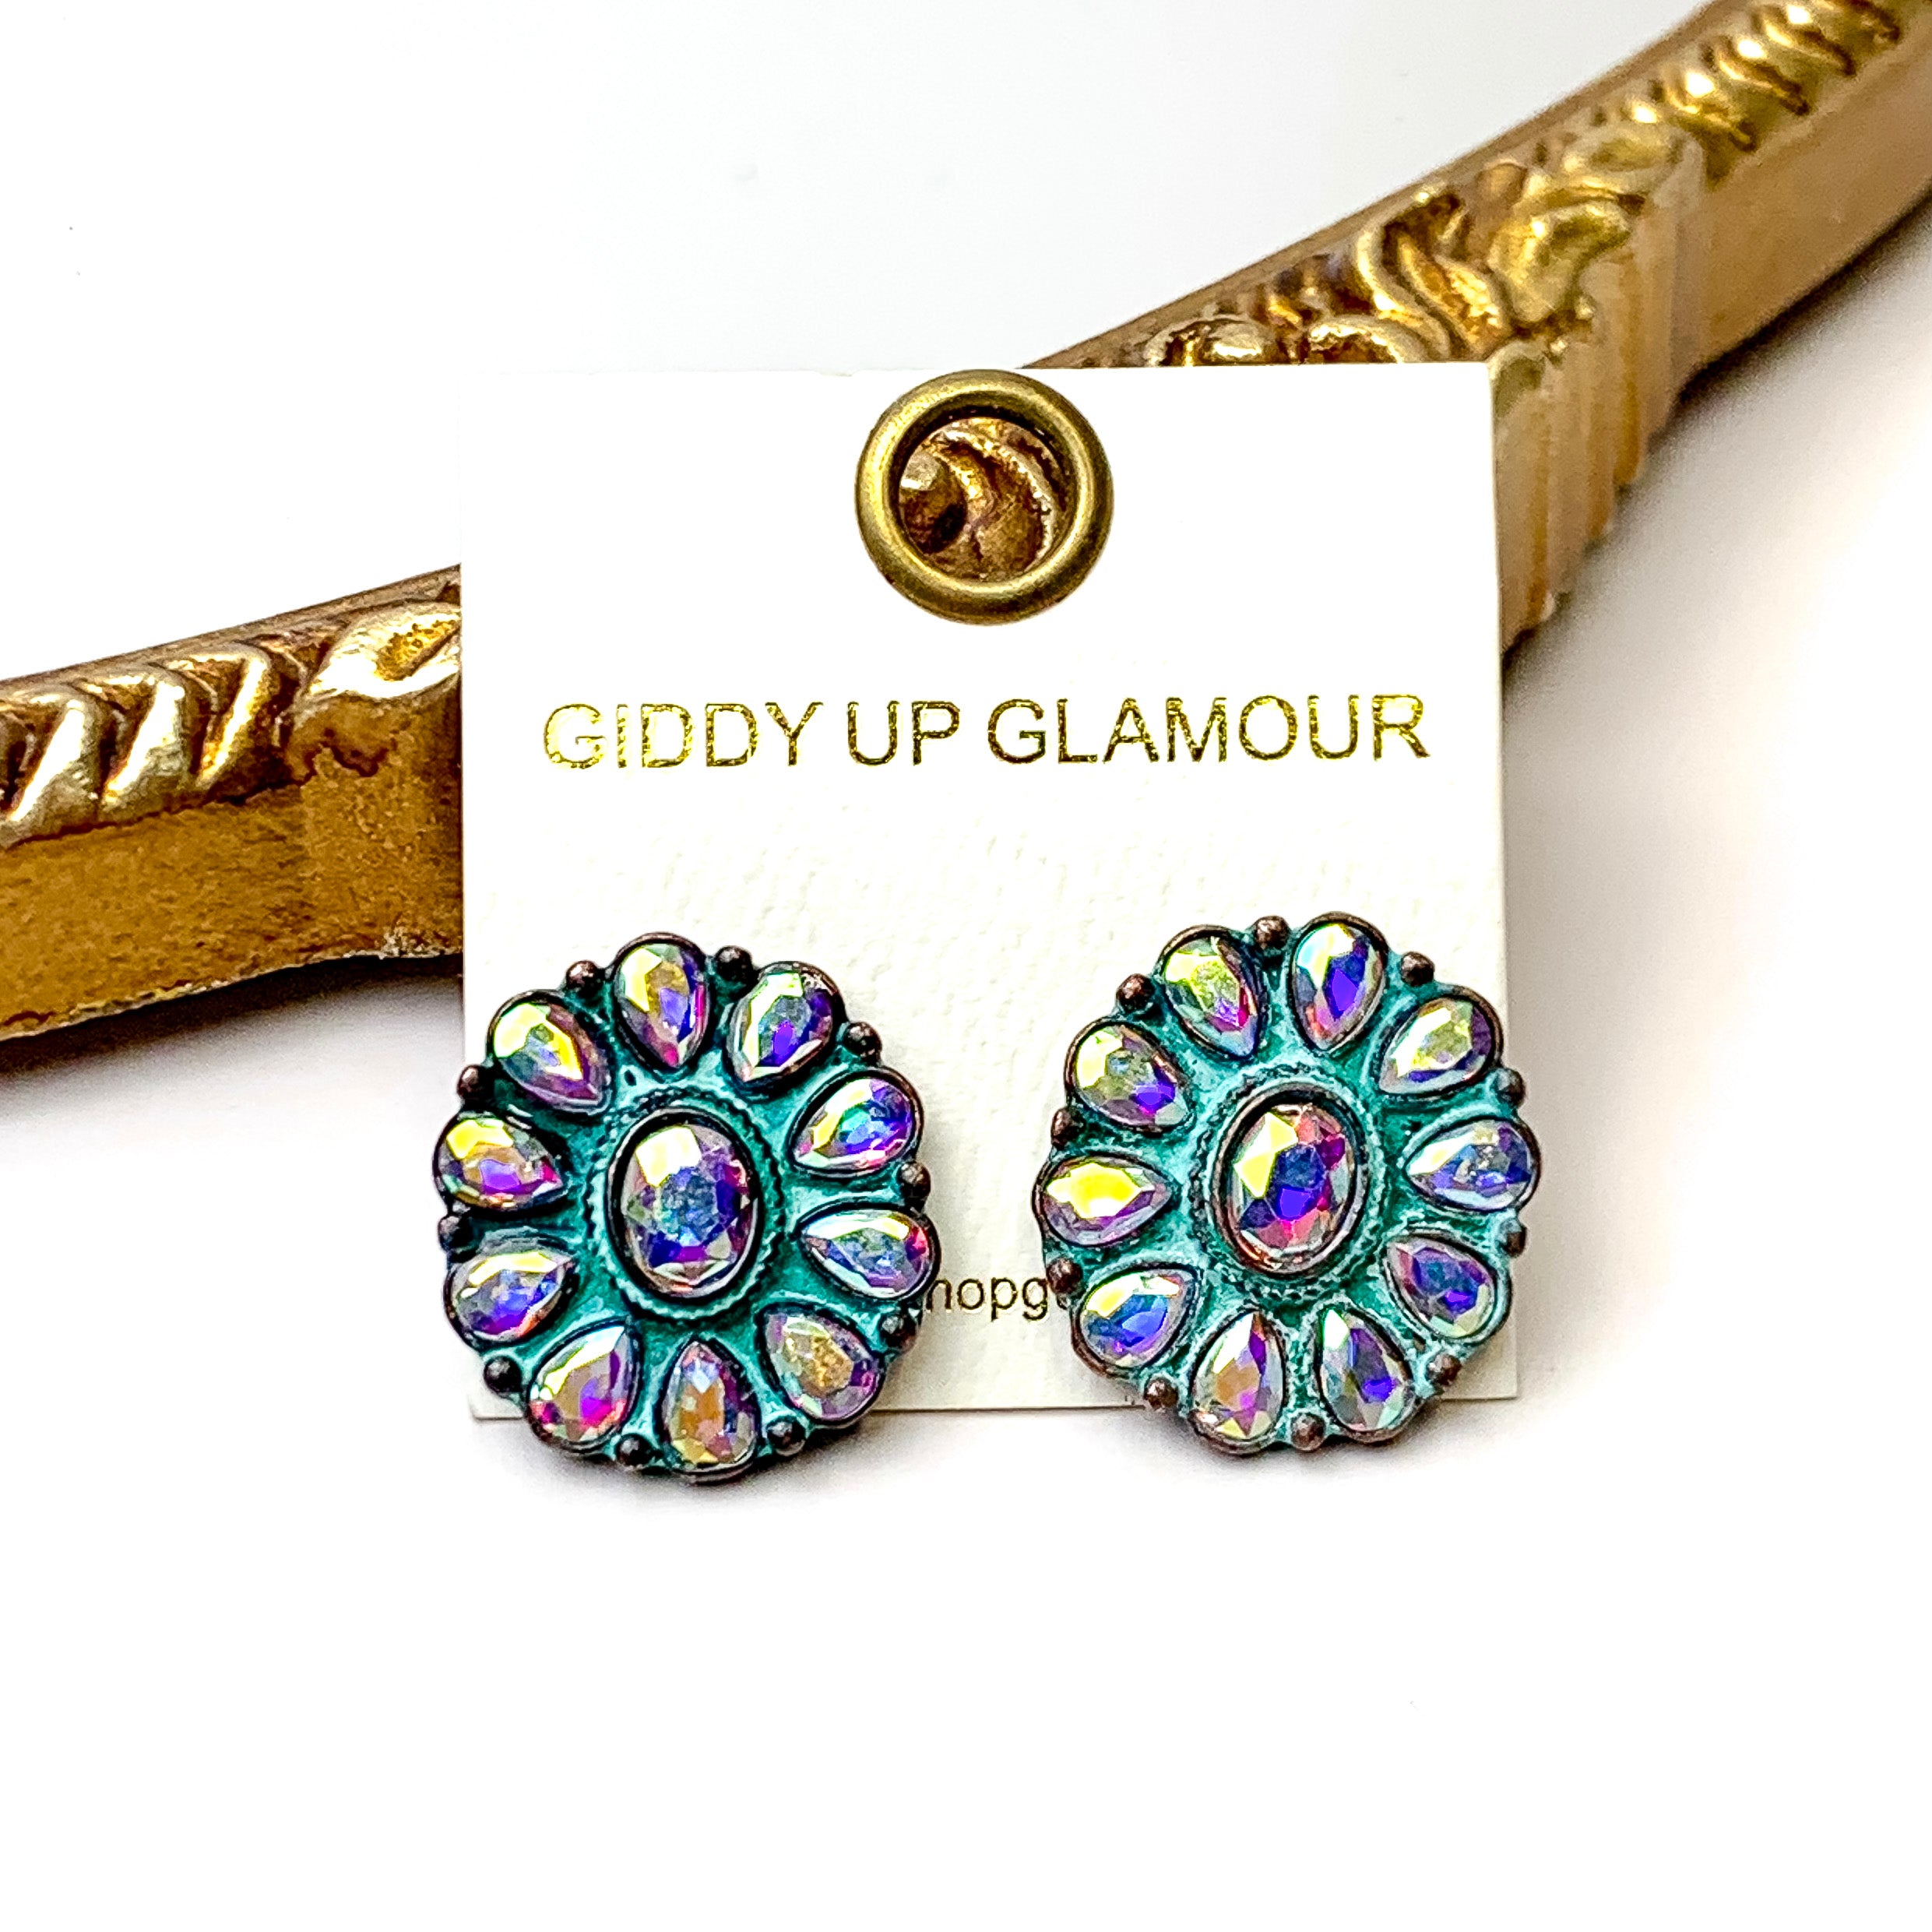 Prismatic Petal AB Stone Flower Concho Stud Earrings in Patina Tone - Giddy Up Glamour Boutique